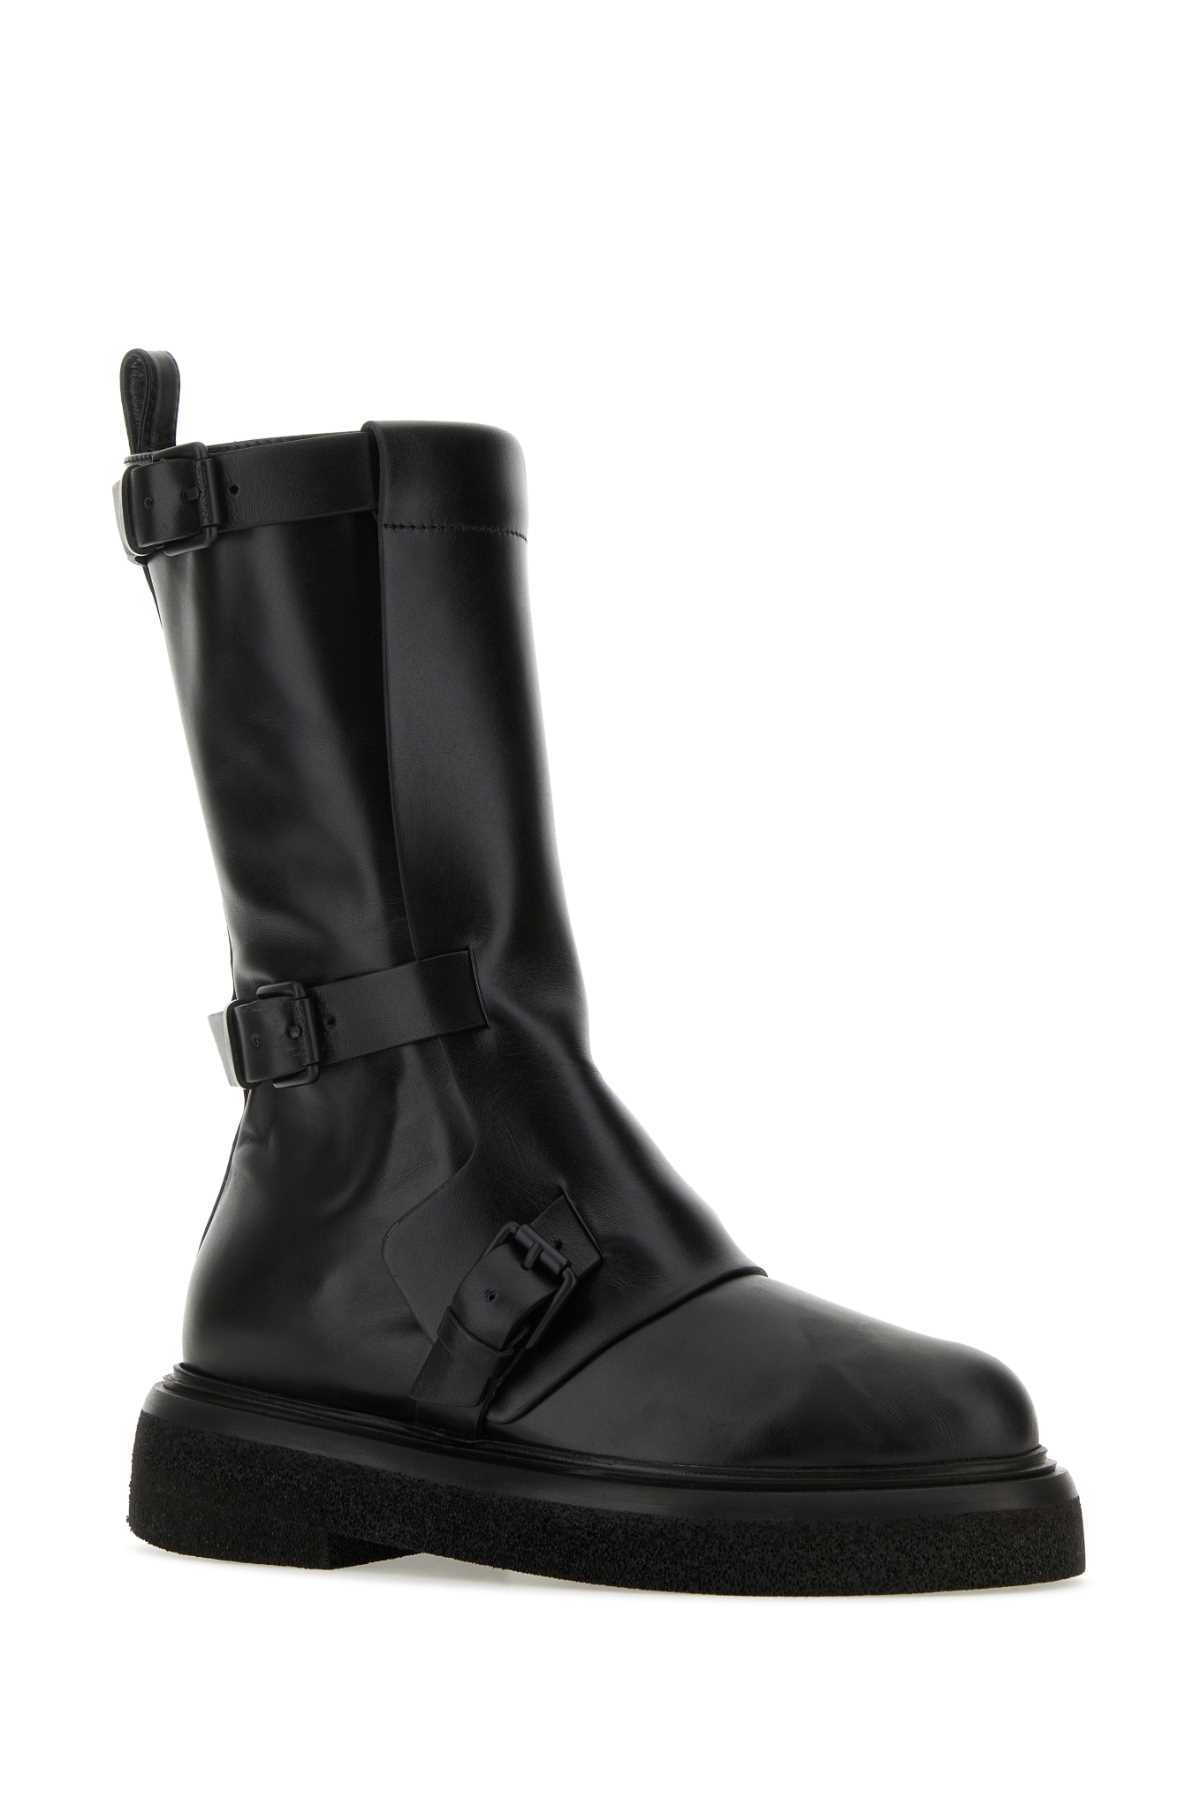 Max Mara Black Leather Bucklesboot Ankle Boots In Nero